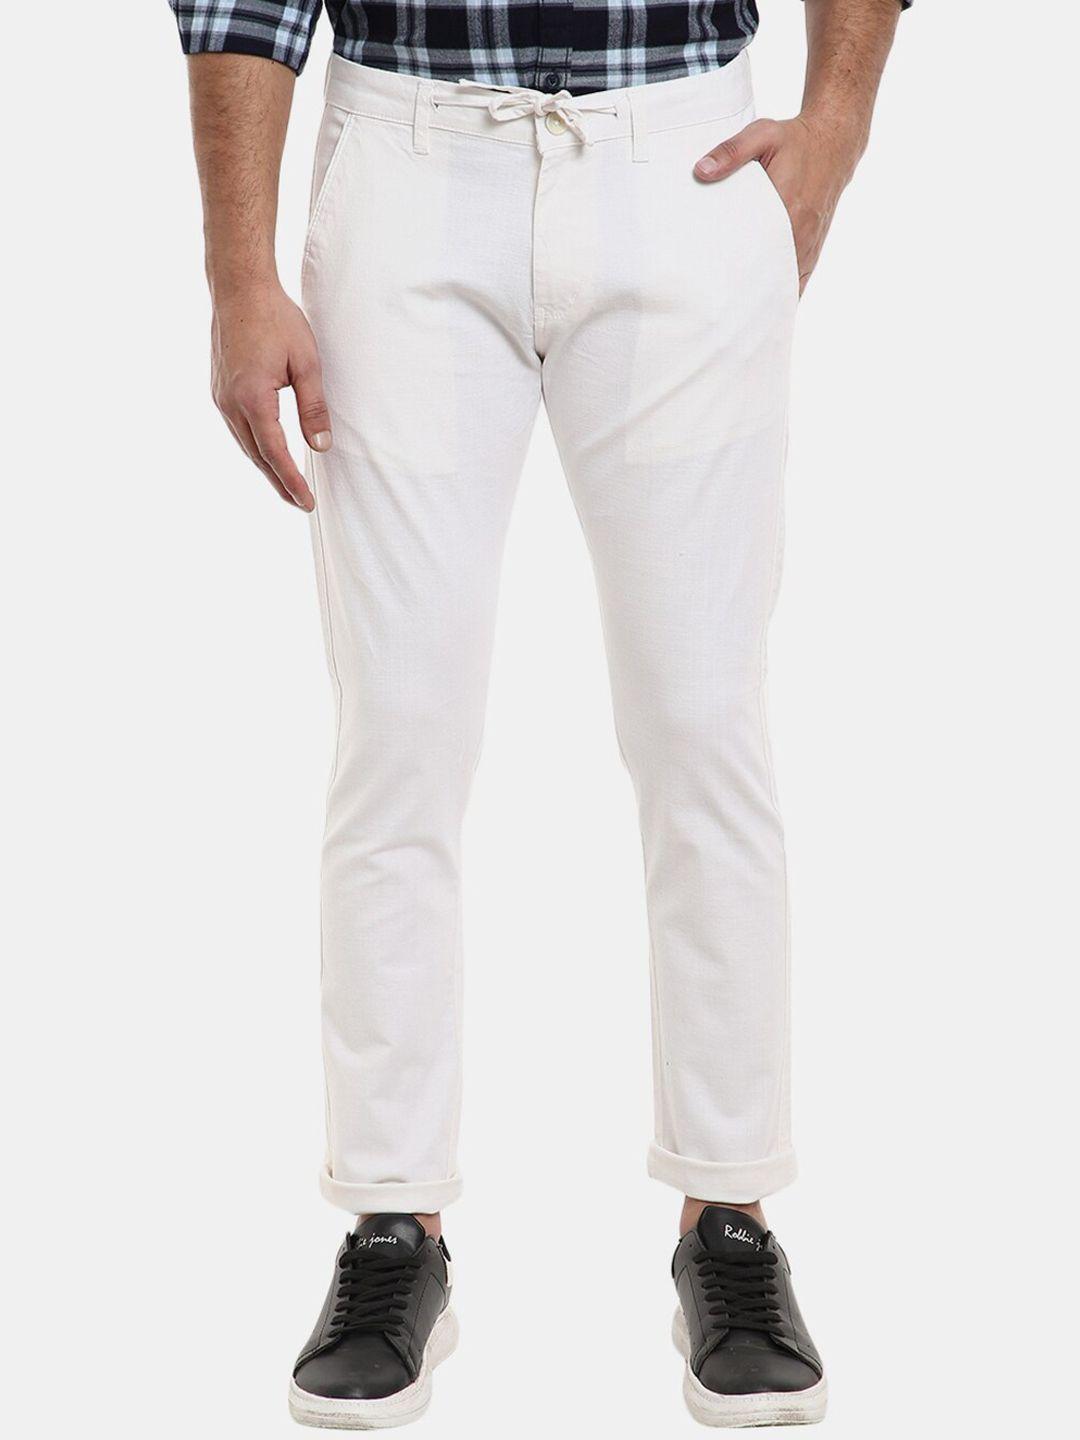 v-mart men white classic slim fit cotton chinos trousers